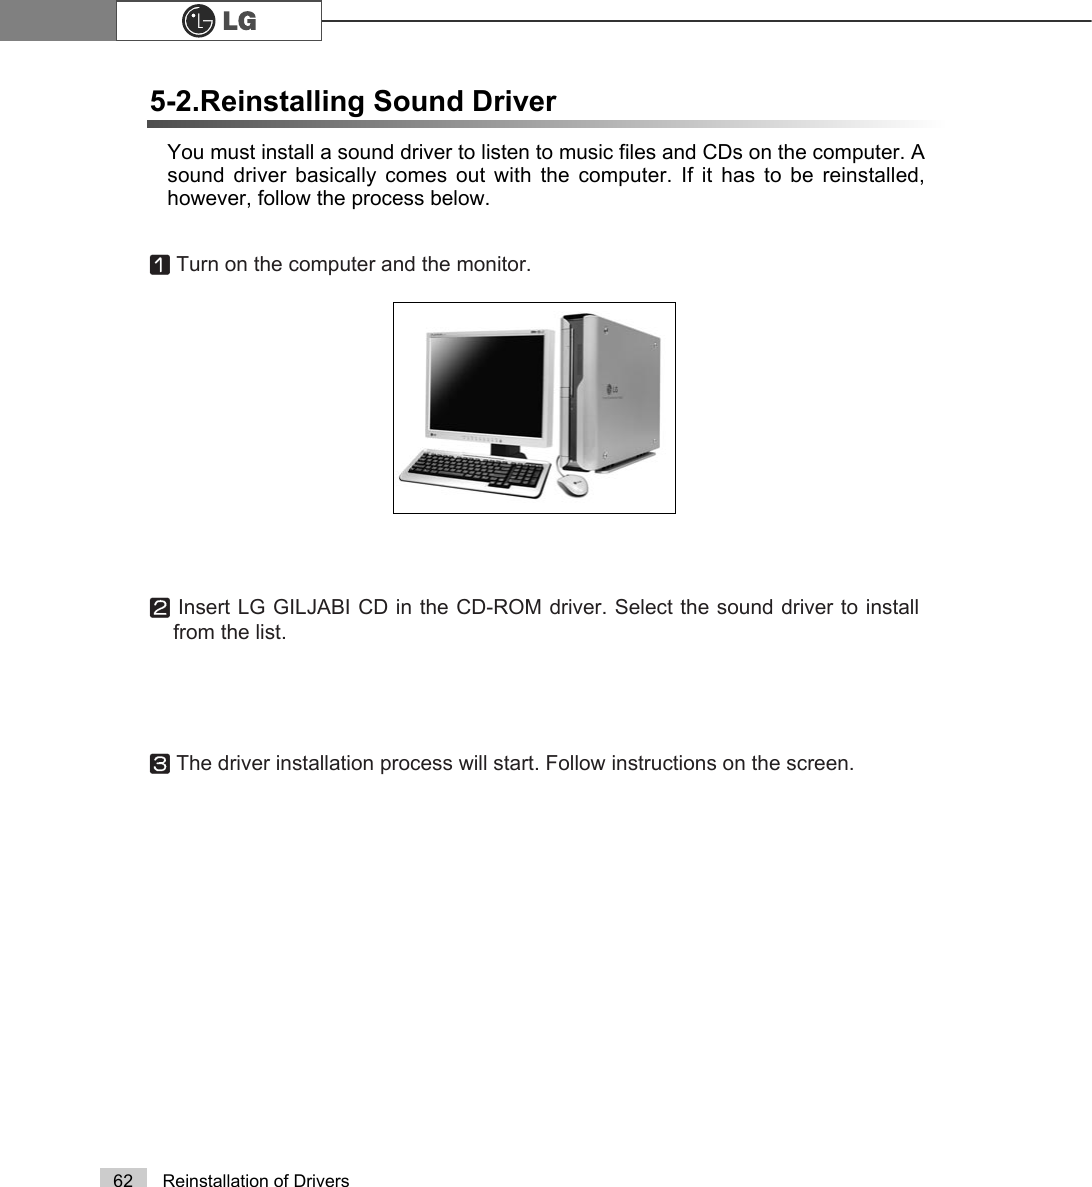 62 Reinstallation of DriversYou must install a sound driver to listen to music files and CDs on the computer. Asound driver basically comes out with the computer. If it has to be reinstalled,however, follow the process below.5-2.Reinstalling Sound DriverⓞTurn on the computer and the monitor.ⓟInsert LG GILJABI CD in the CD-ROM driver. Select the sound driver to installfrom the list.ⓠThe driver installation process will start. Follow instructions on the screen.